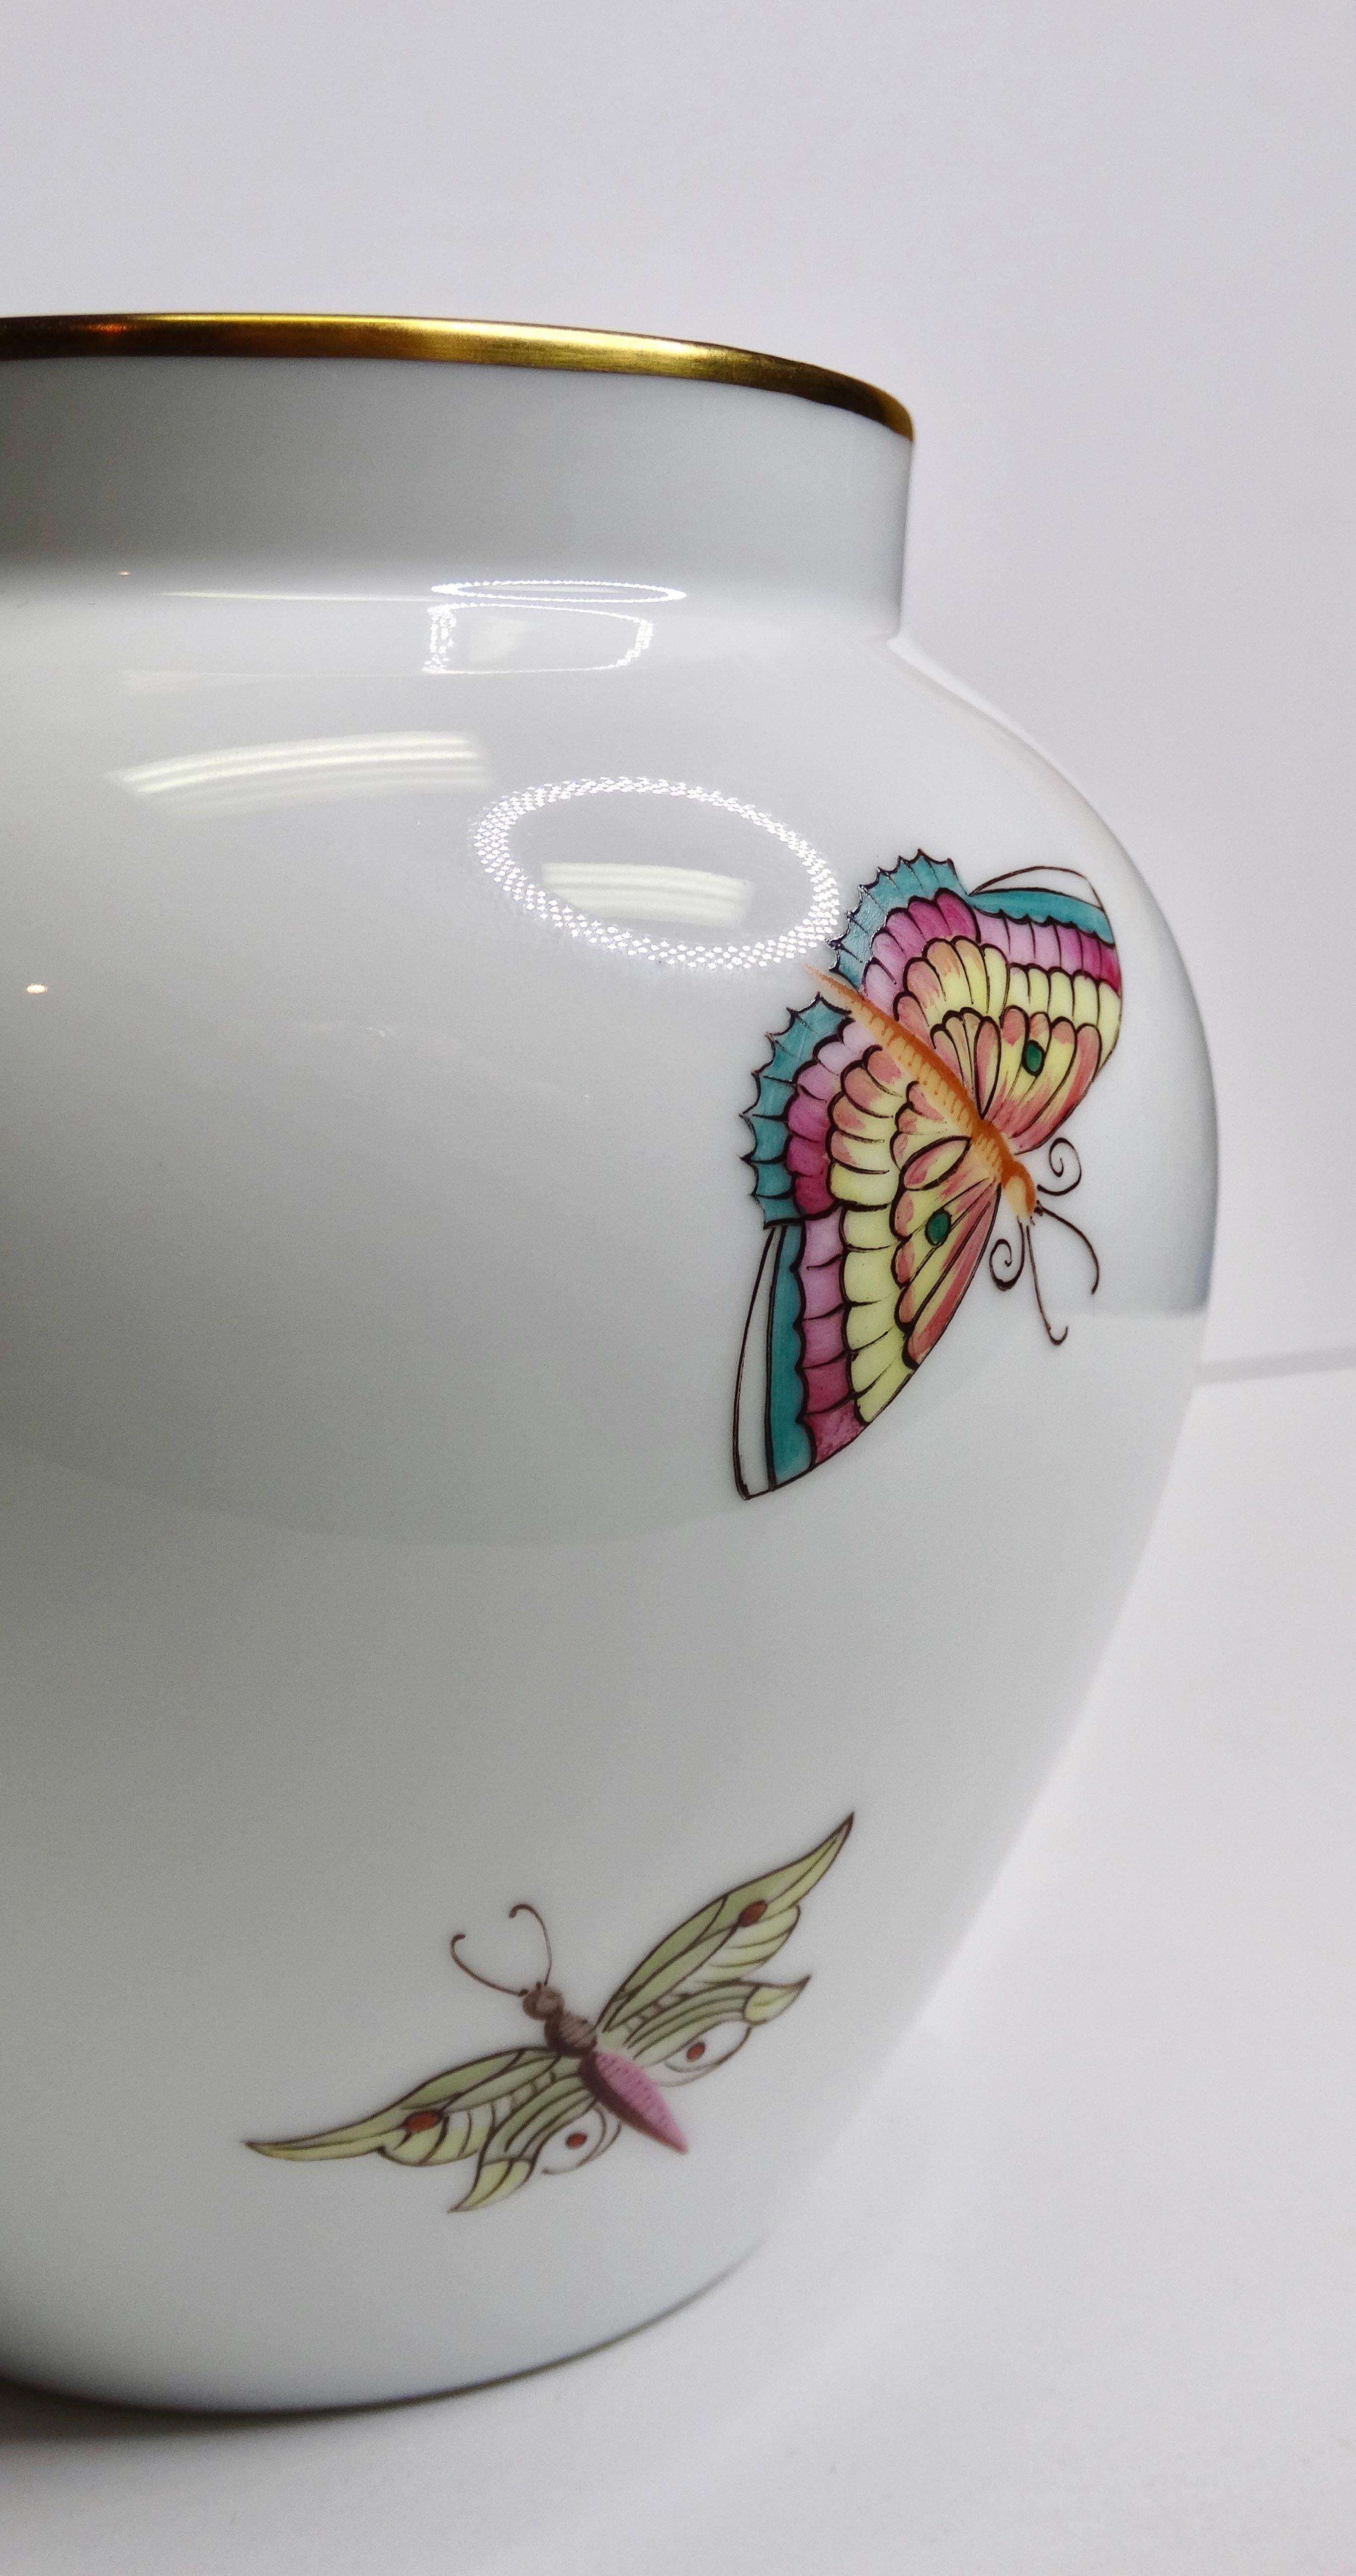 This is the most adorable Tiffany & Co. vase and it needs to be yours! This beautiful hand-painted vase has the best Parisian charm. Would you ever imagine that butterflies and crickets could look more beautiful? The quality and love put into every